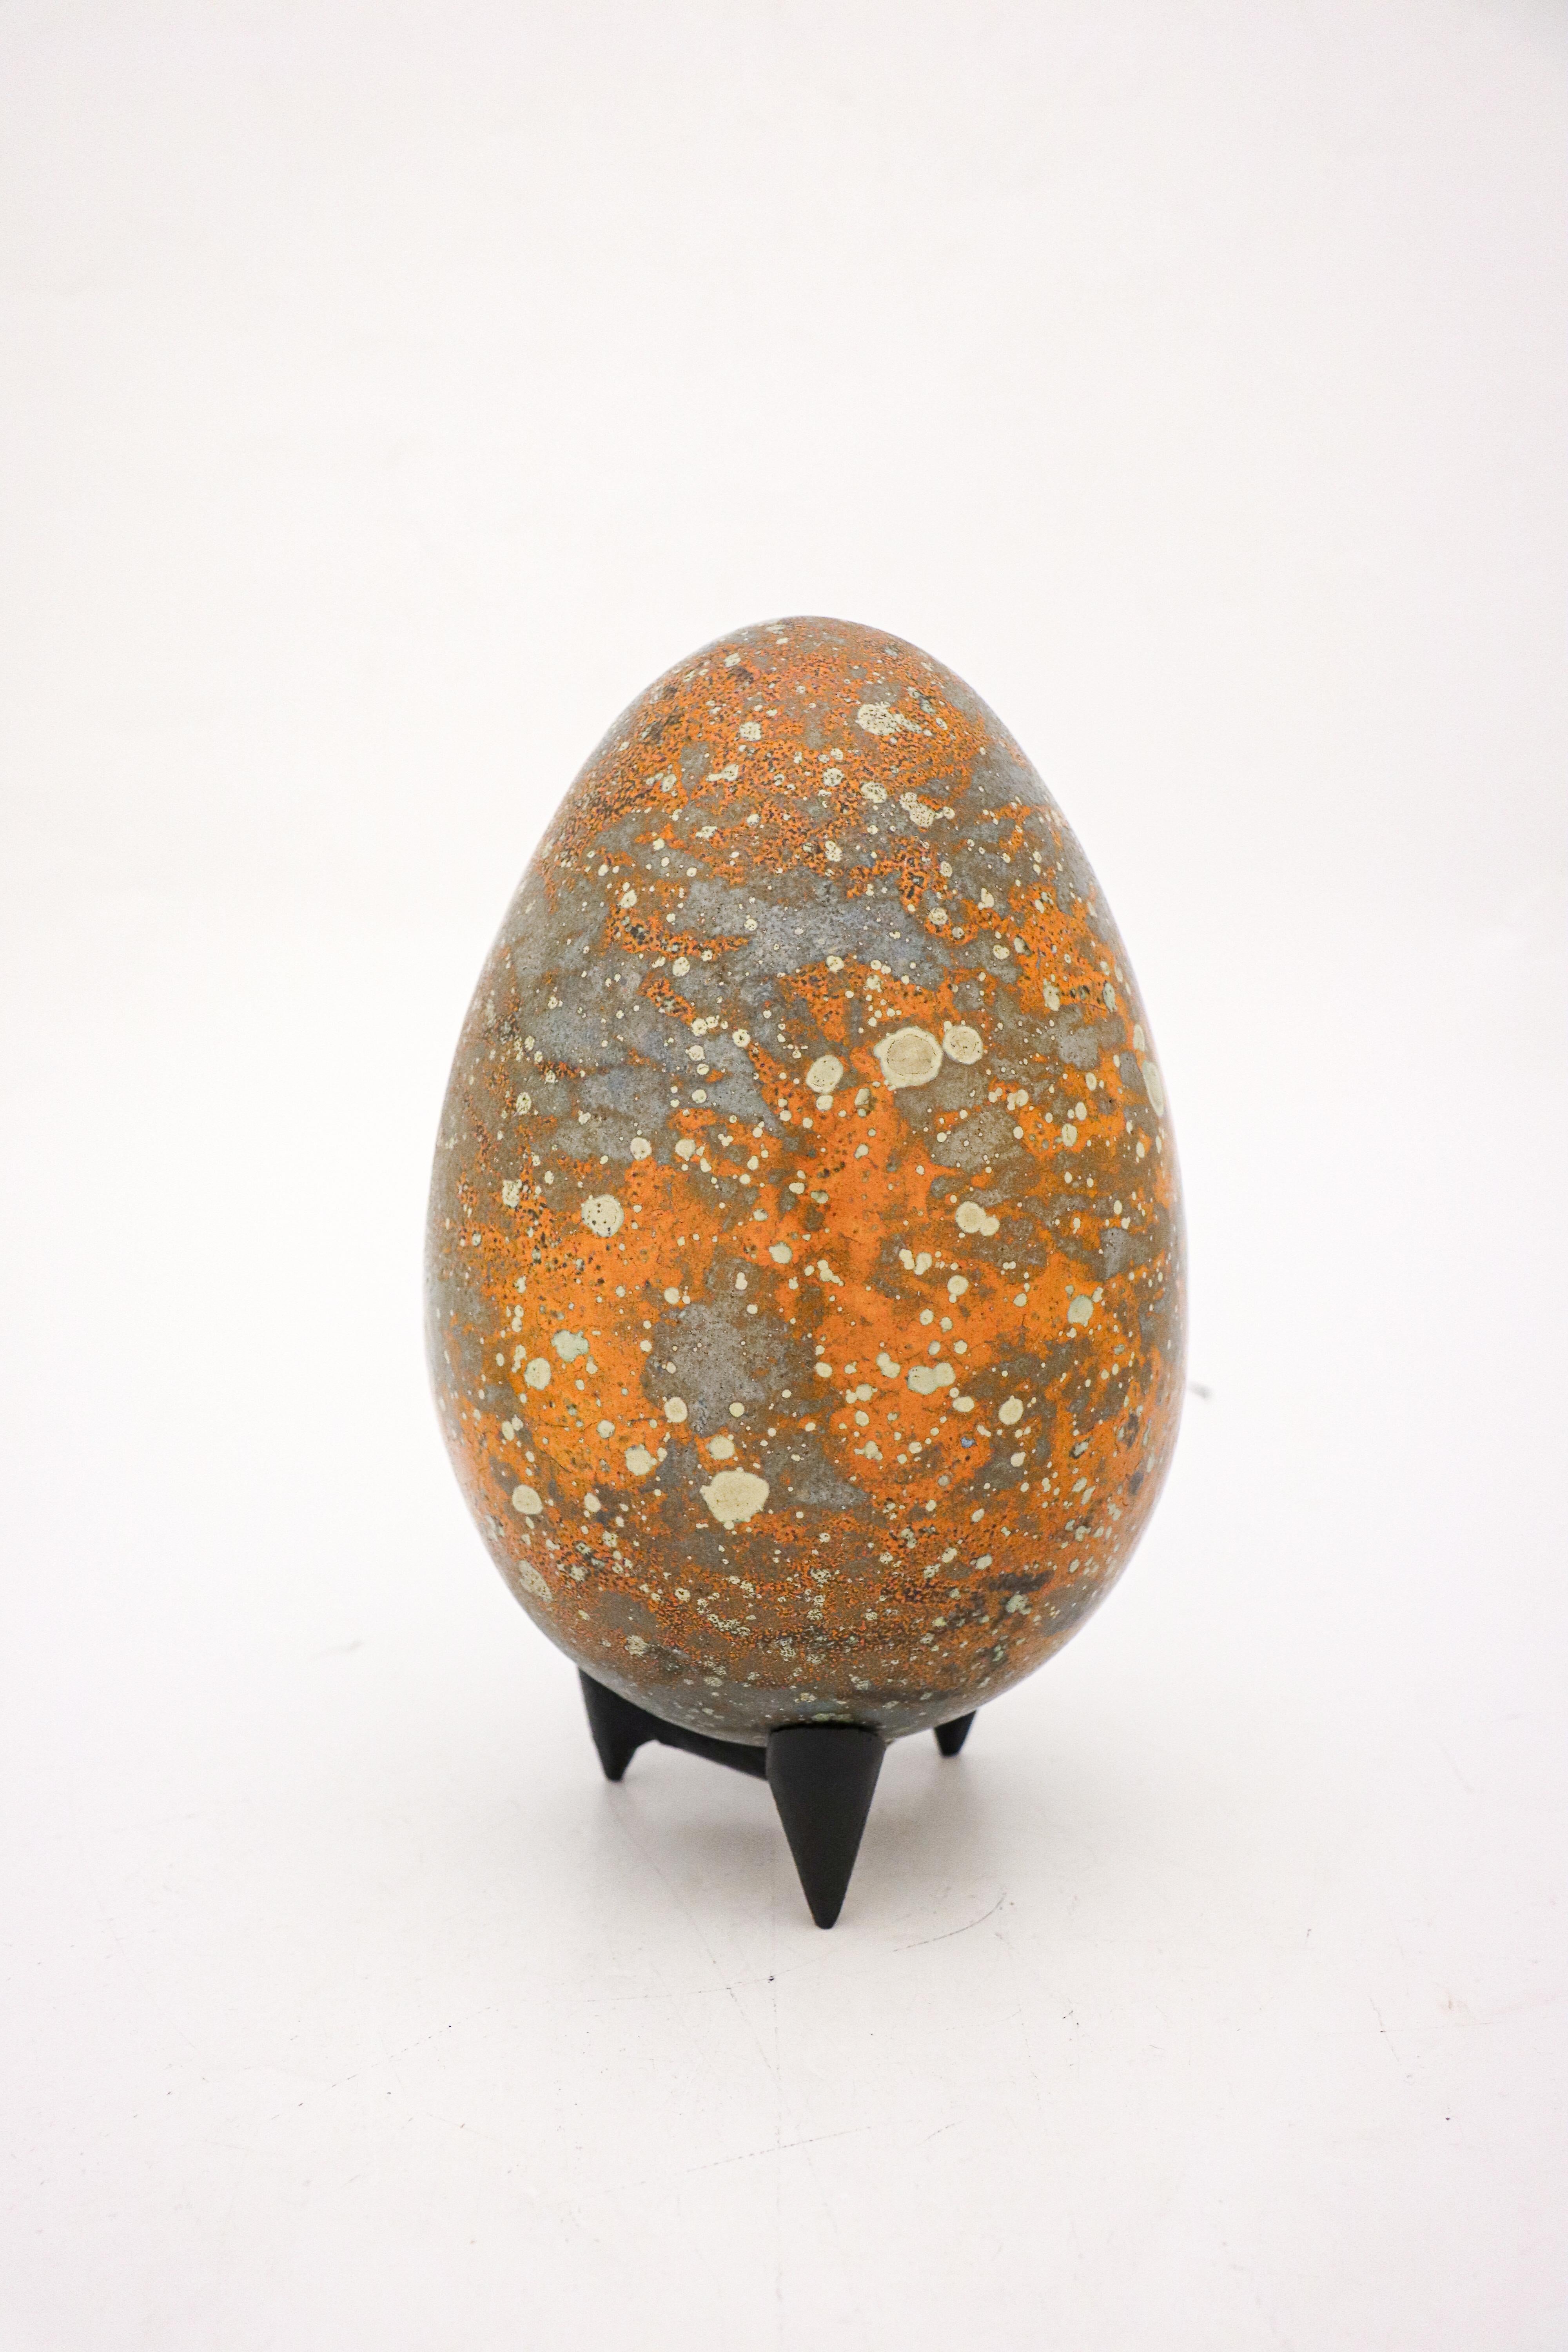 Mid-20th Century Stoneware Egg Sculpture Orange & Gray-Tone by Hans Hedberg, Biot, France For Sale